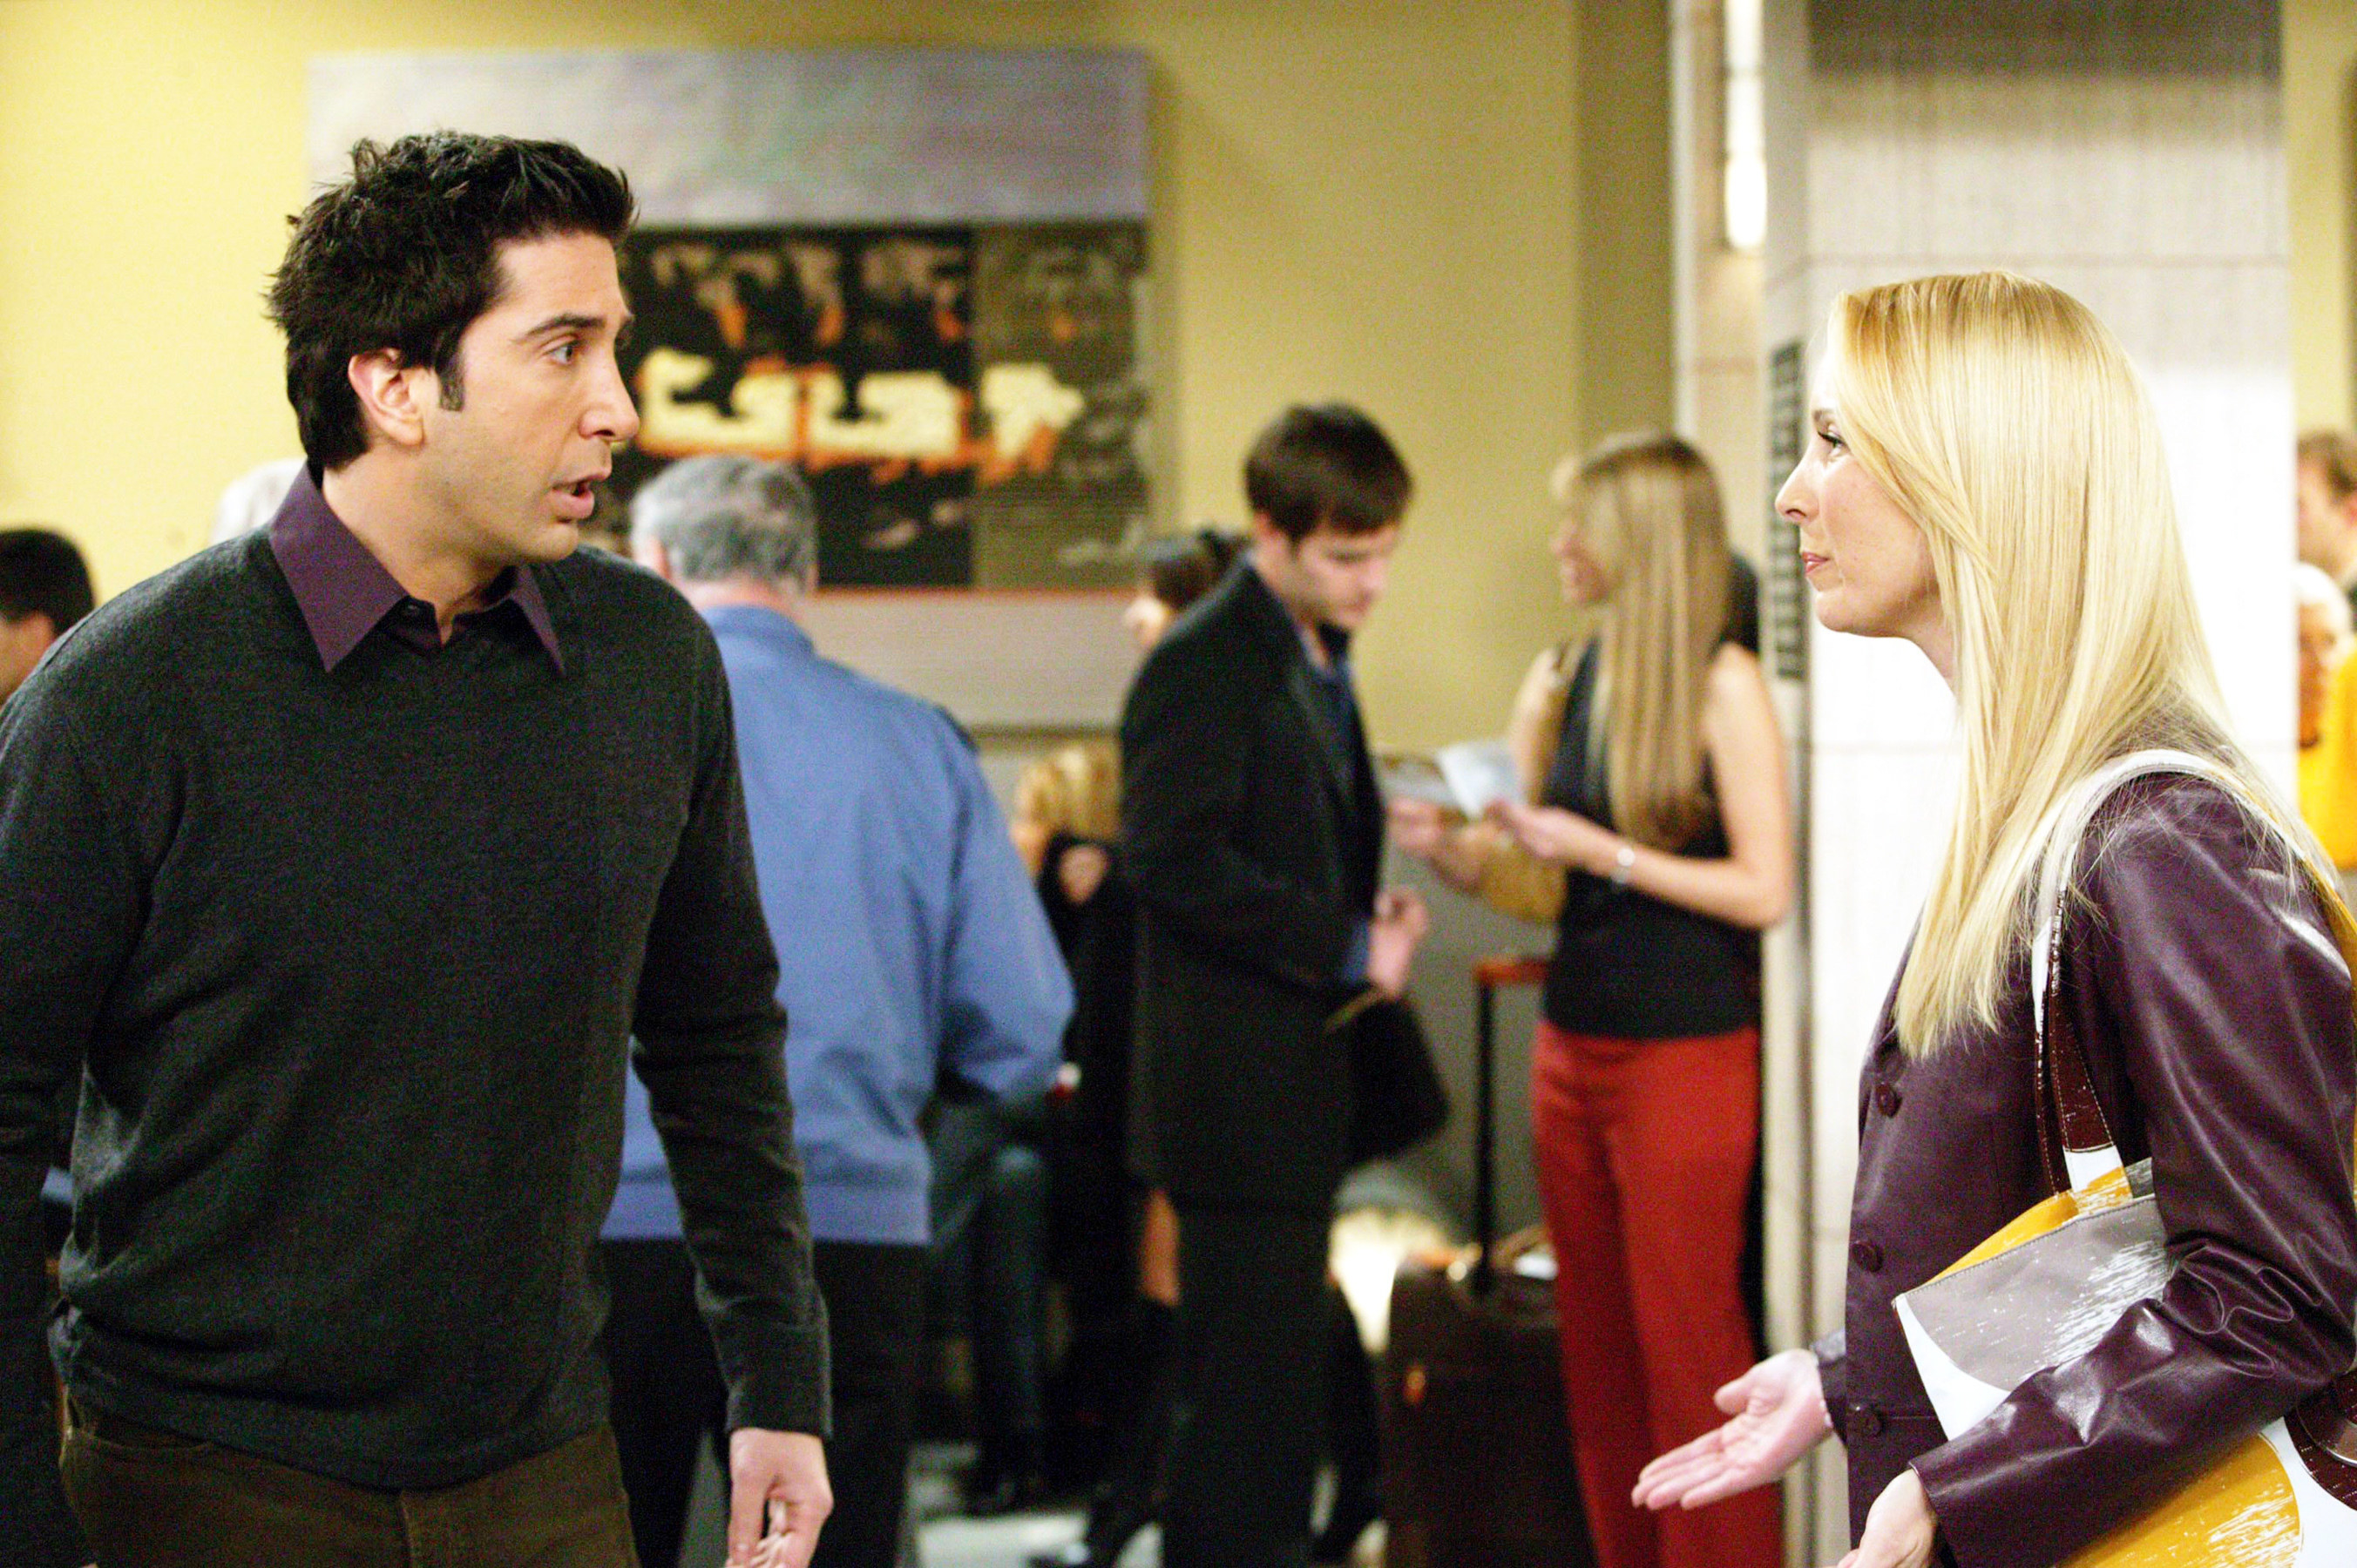 David Schwimmer and Lisa Kudrow look tense in an airport